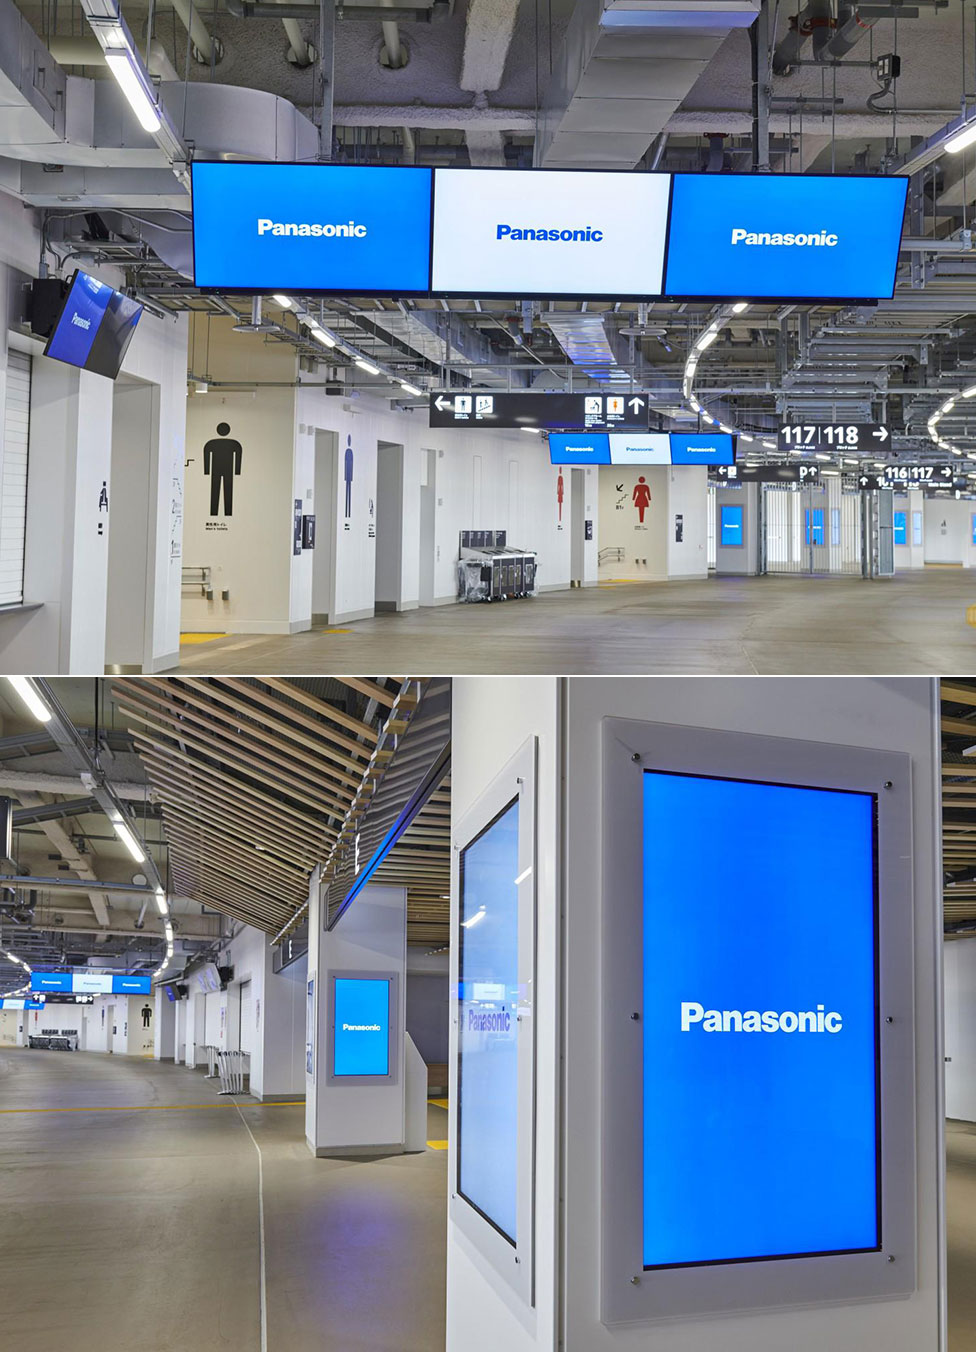 Panasonic’s AcroSign® digital signage efficiently provides a variety of information within the stadium. Display content can be switched for each area of the concourse. 